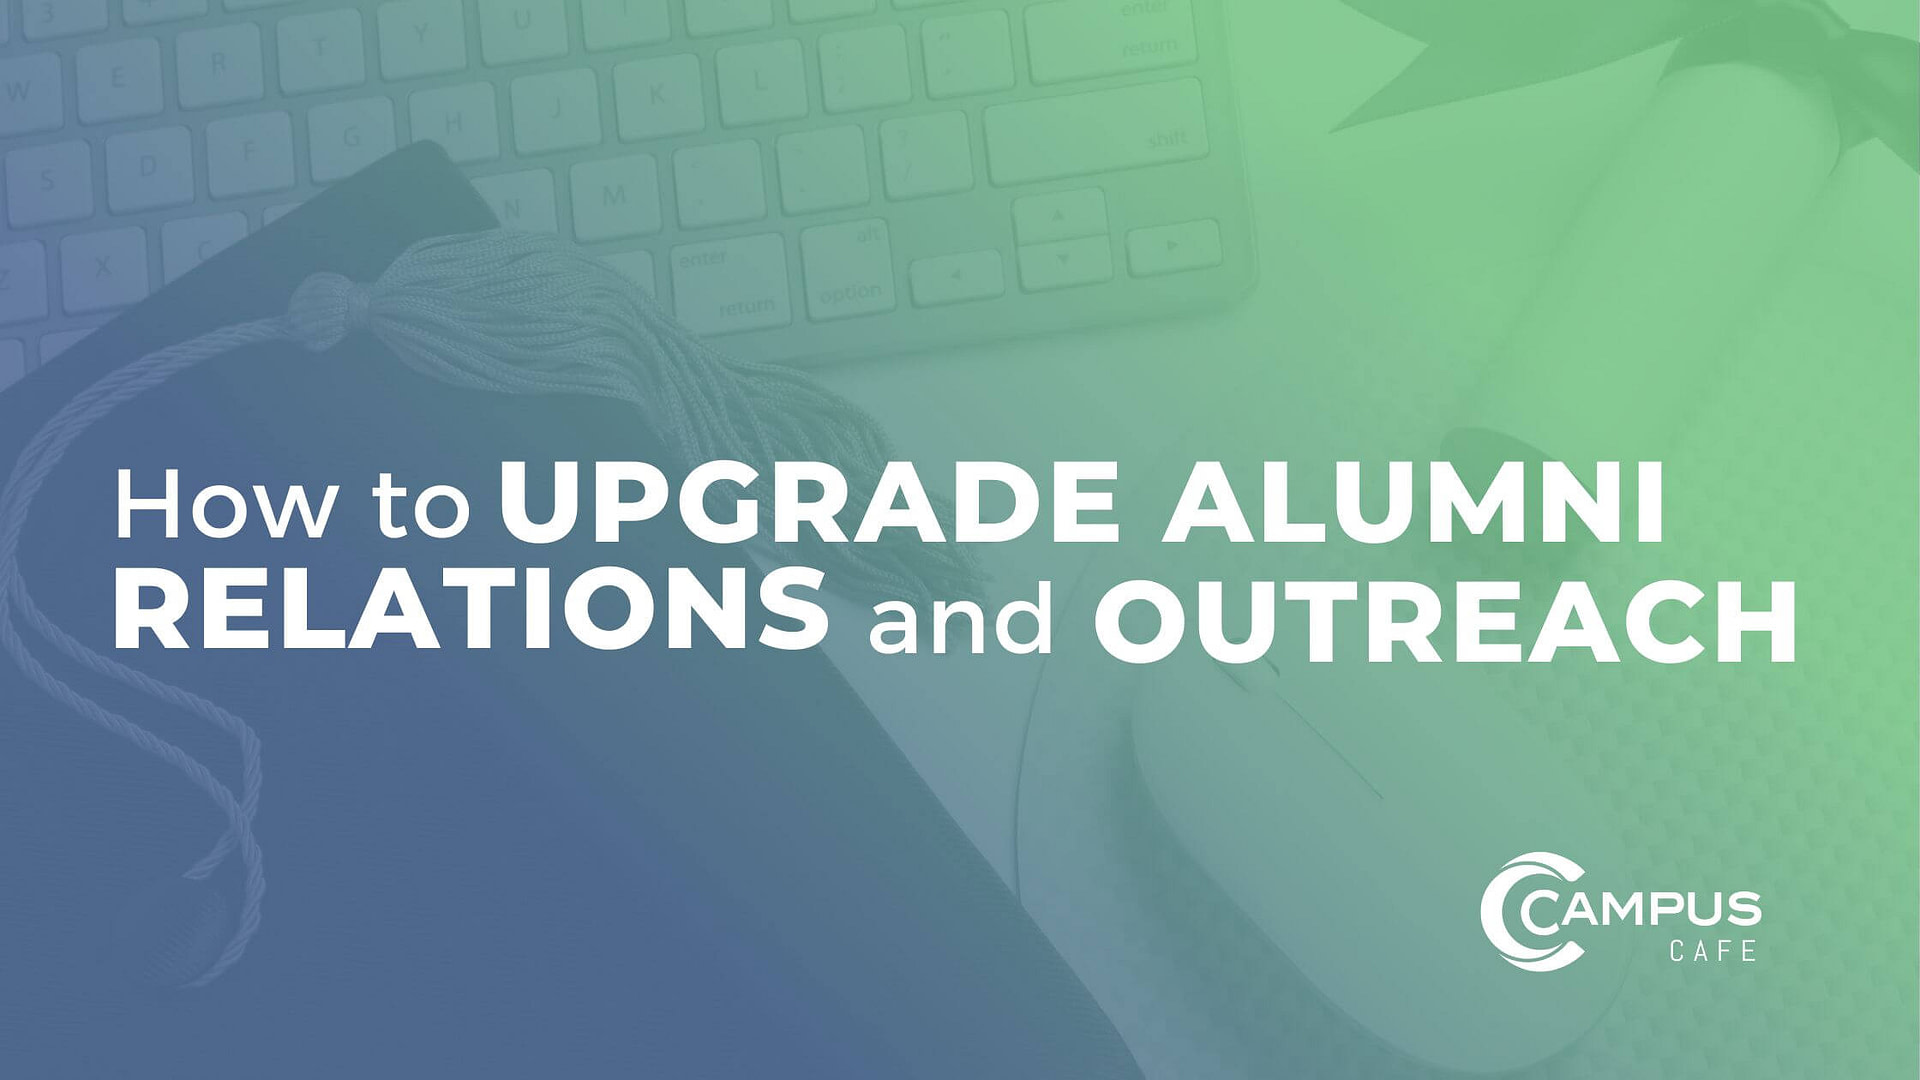 Alumni management software helps small schools with targeted alumni outreach and gift campaigns.